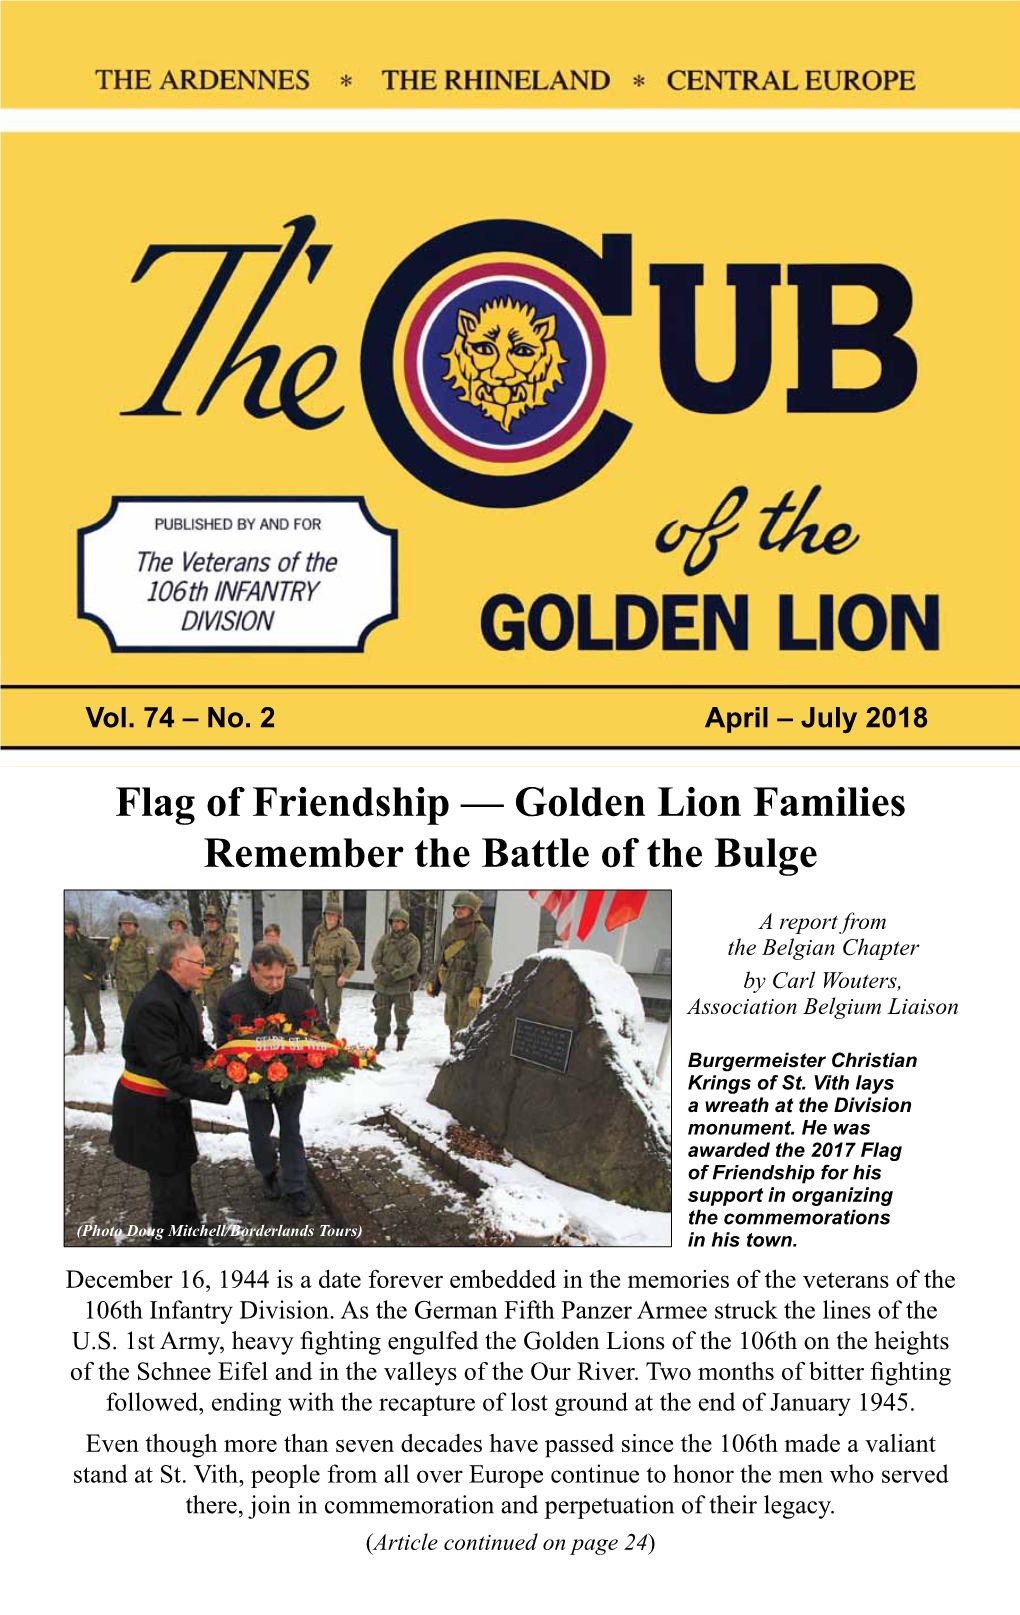 Golden Lion Families Remember the Battle of the Bulge